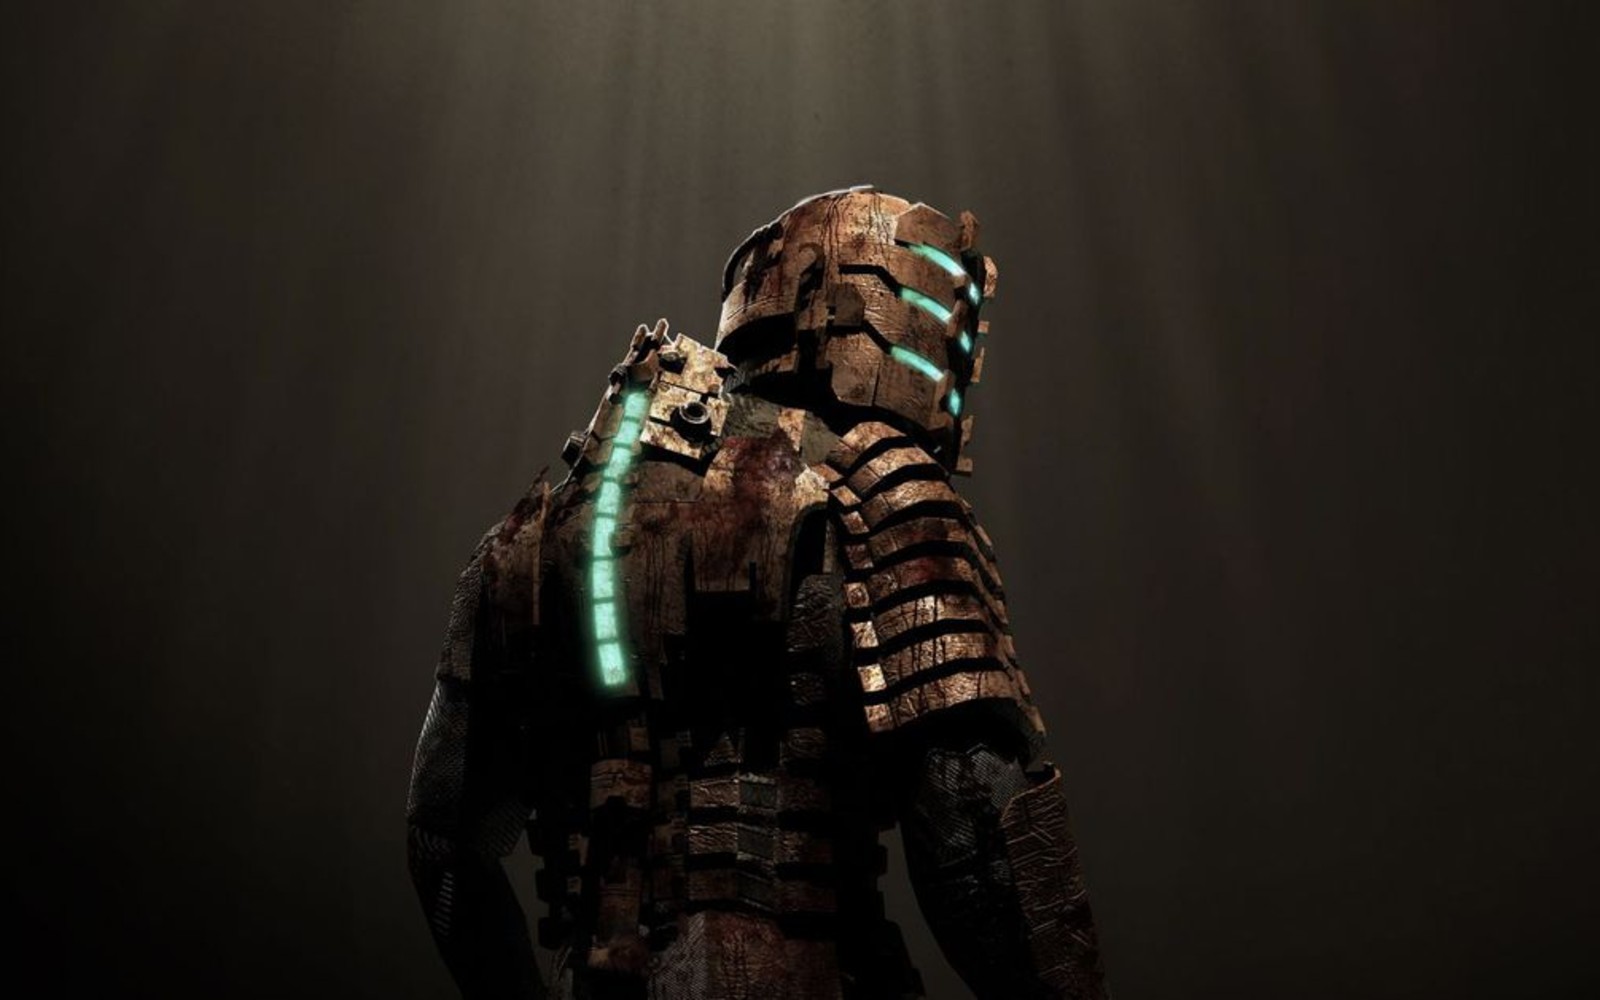 ‘Dead Space’ fans can get a sneak peek at the remake today